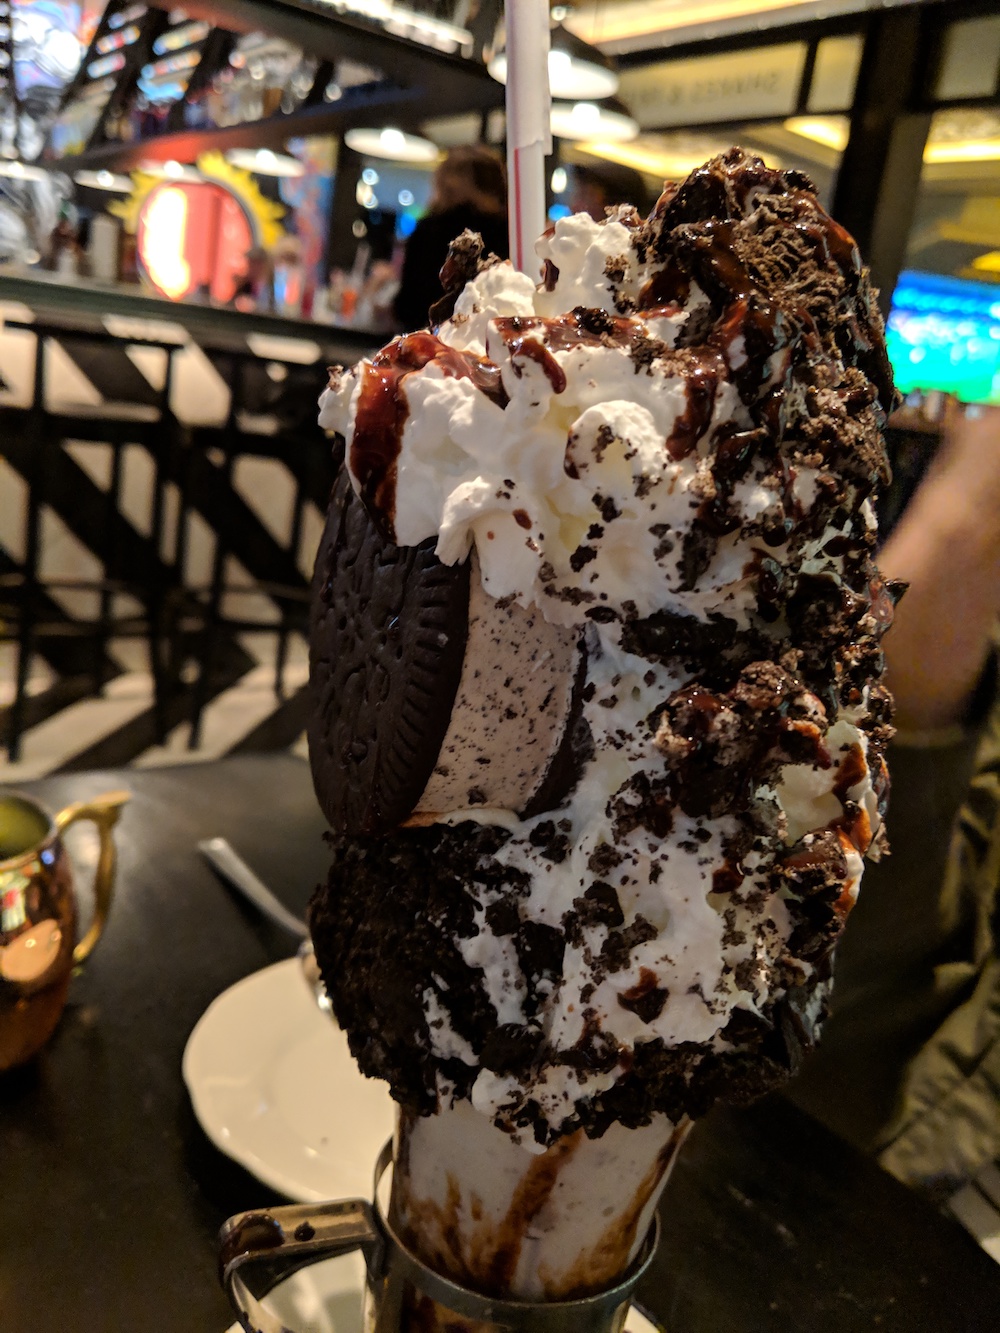 Yes. That's an ice cream sandwich stuck to the glass.